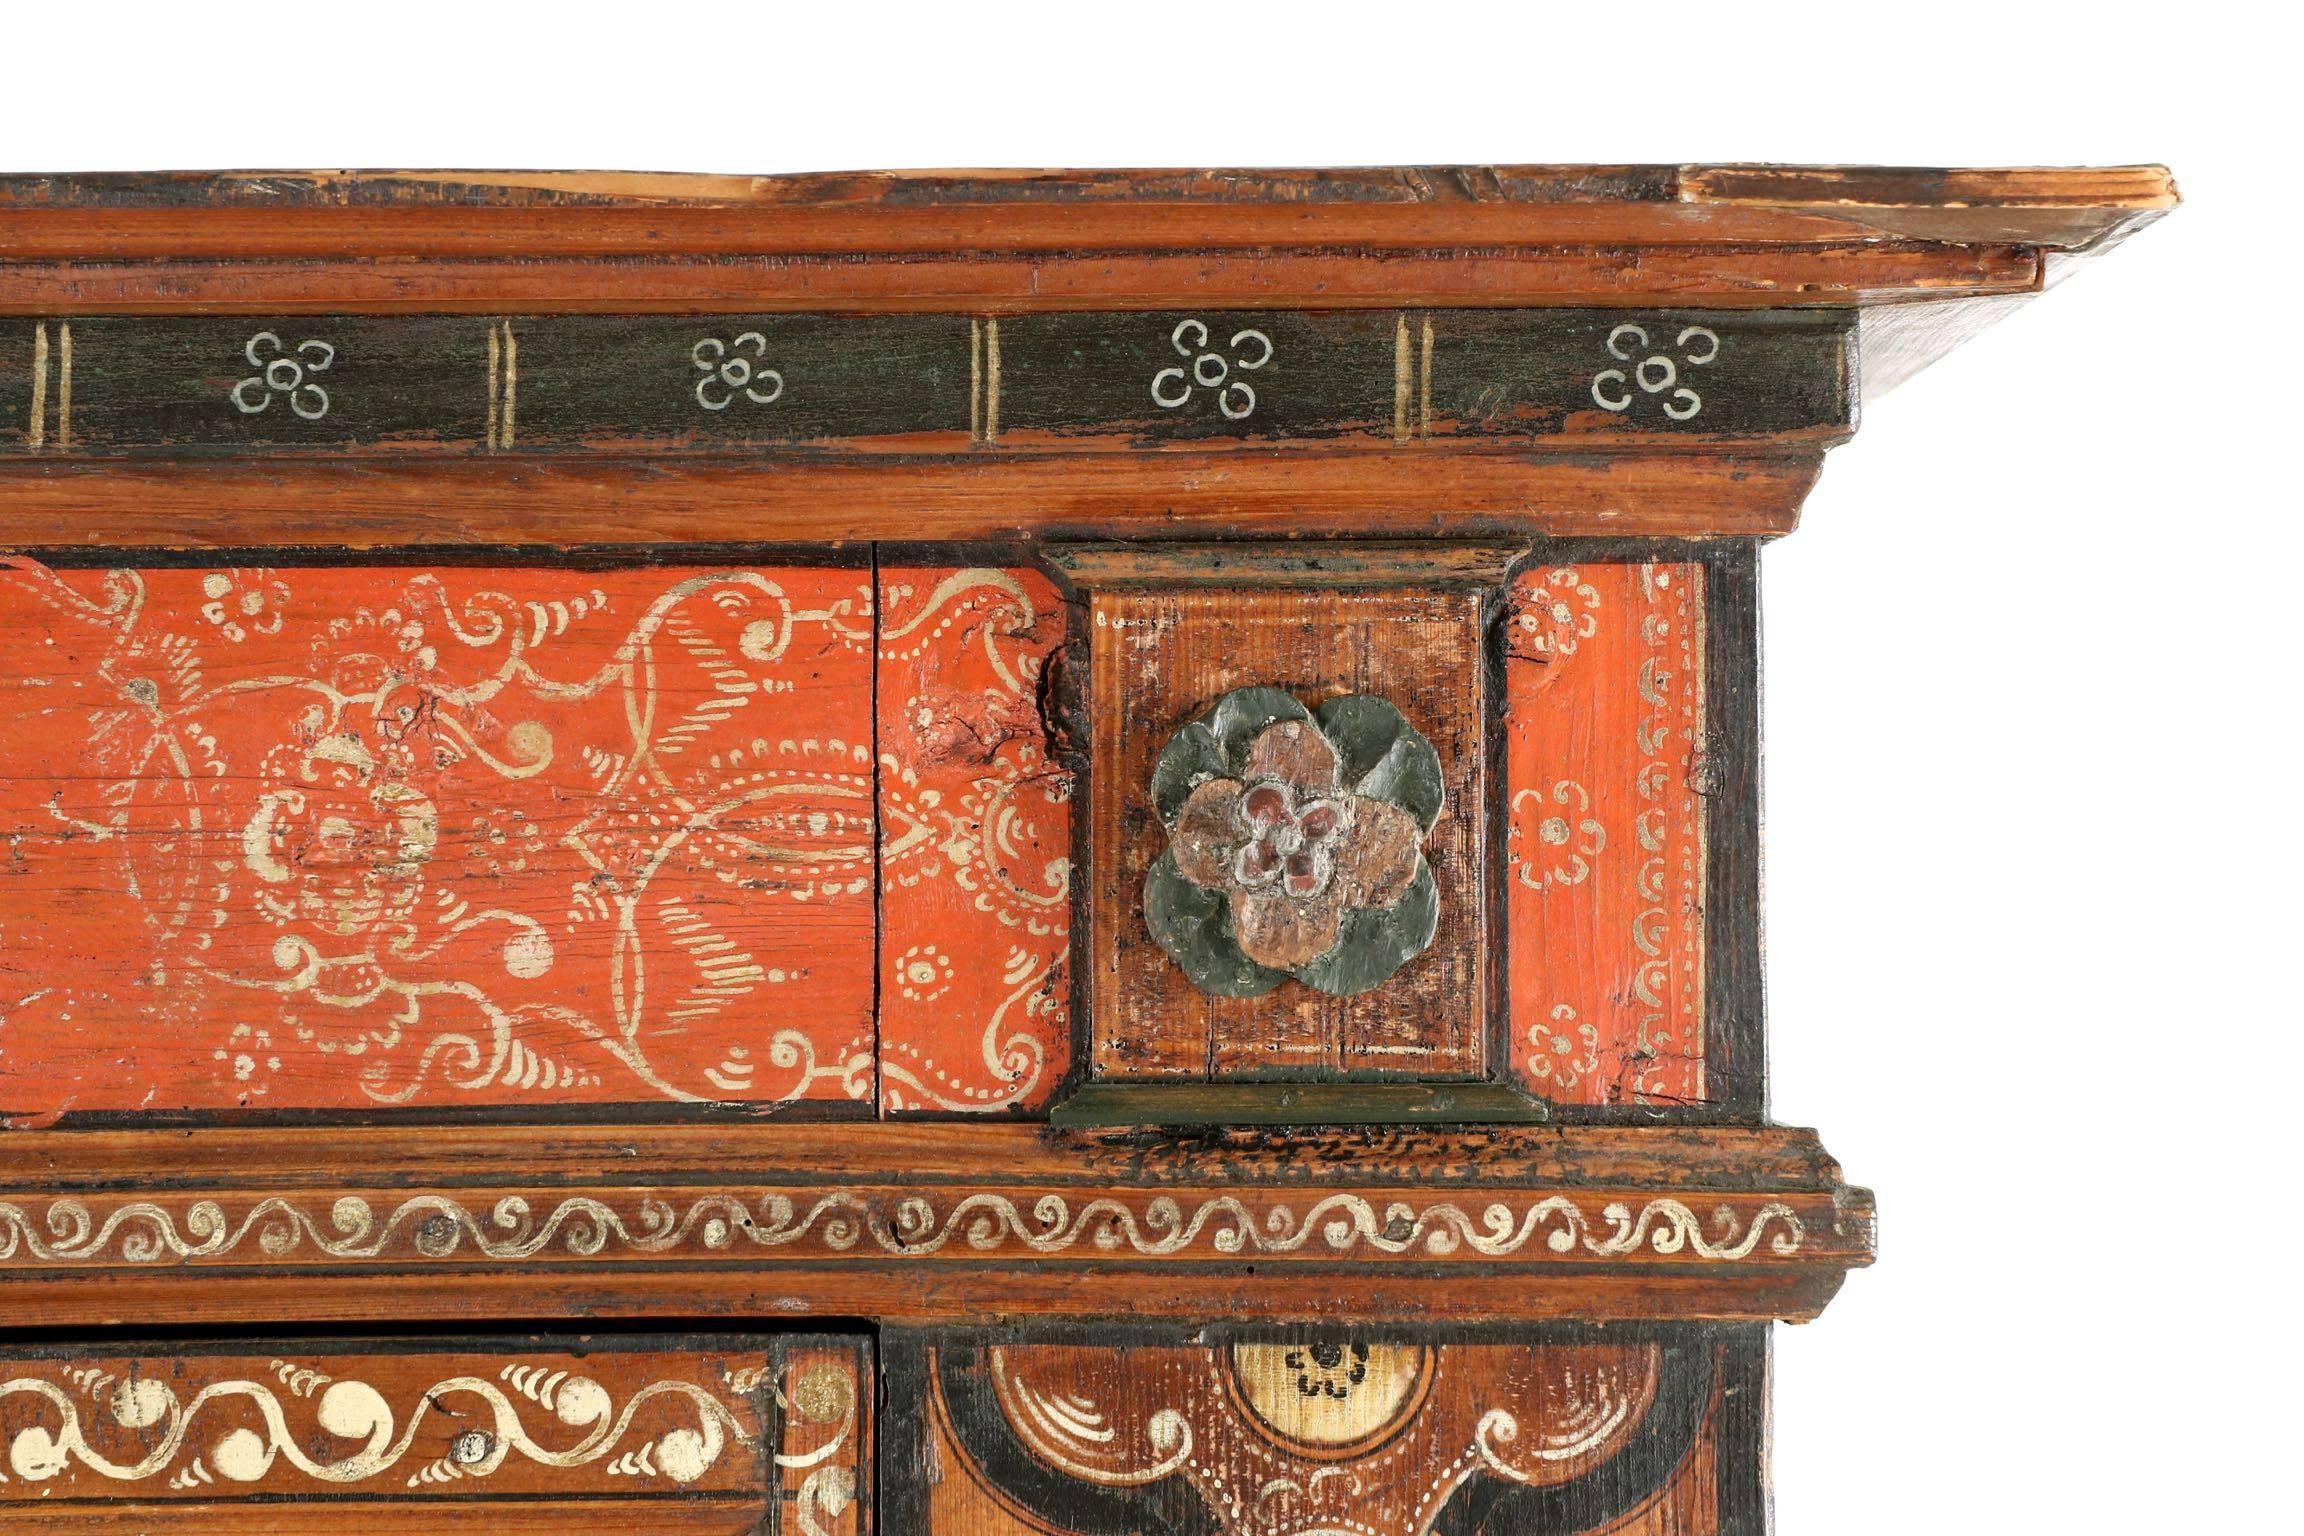 A most striking piece for its original grimy Folk Art painted surface, in particular the vivid display of symmetrical and yet wholly unique floral displays across the recessed panels in both doors. A burnt orange ground color allows the mellow